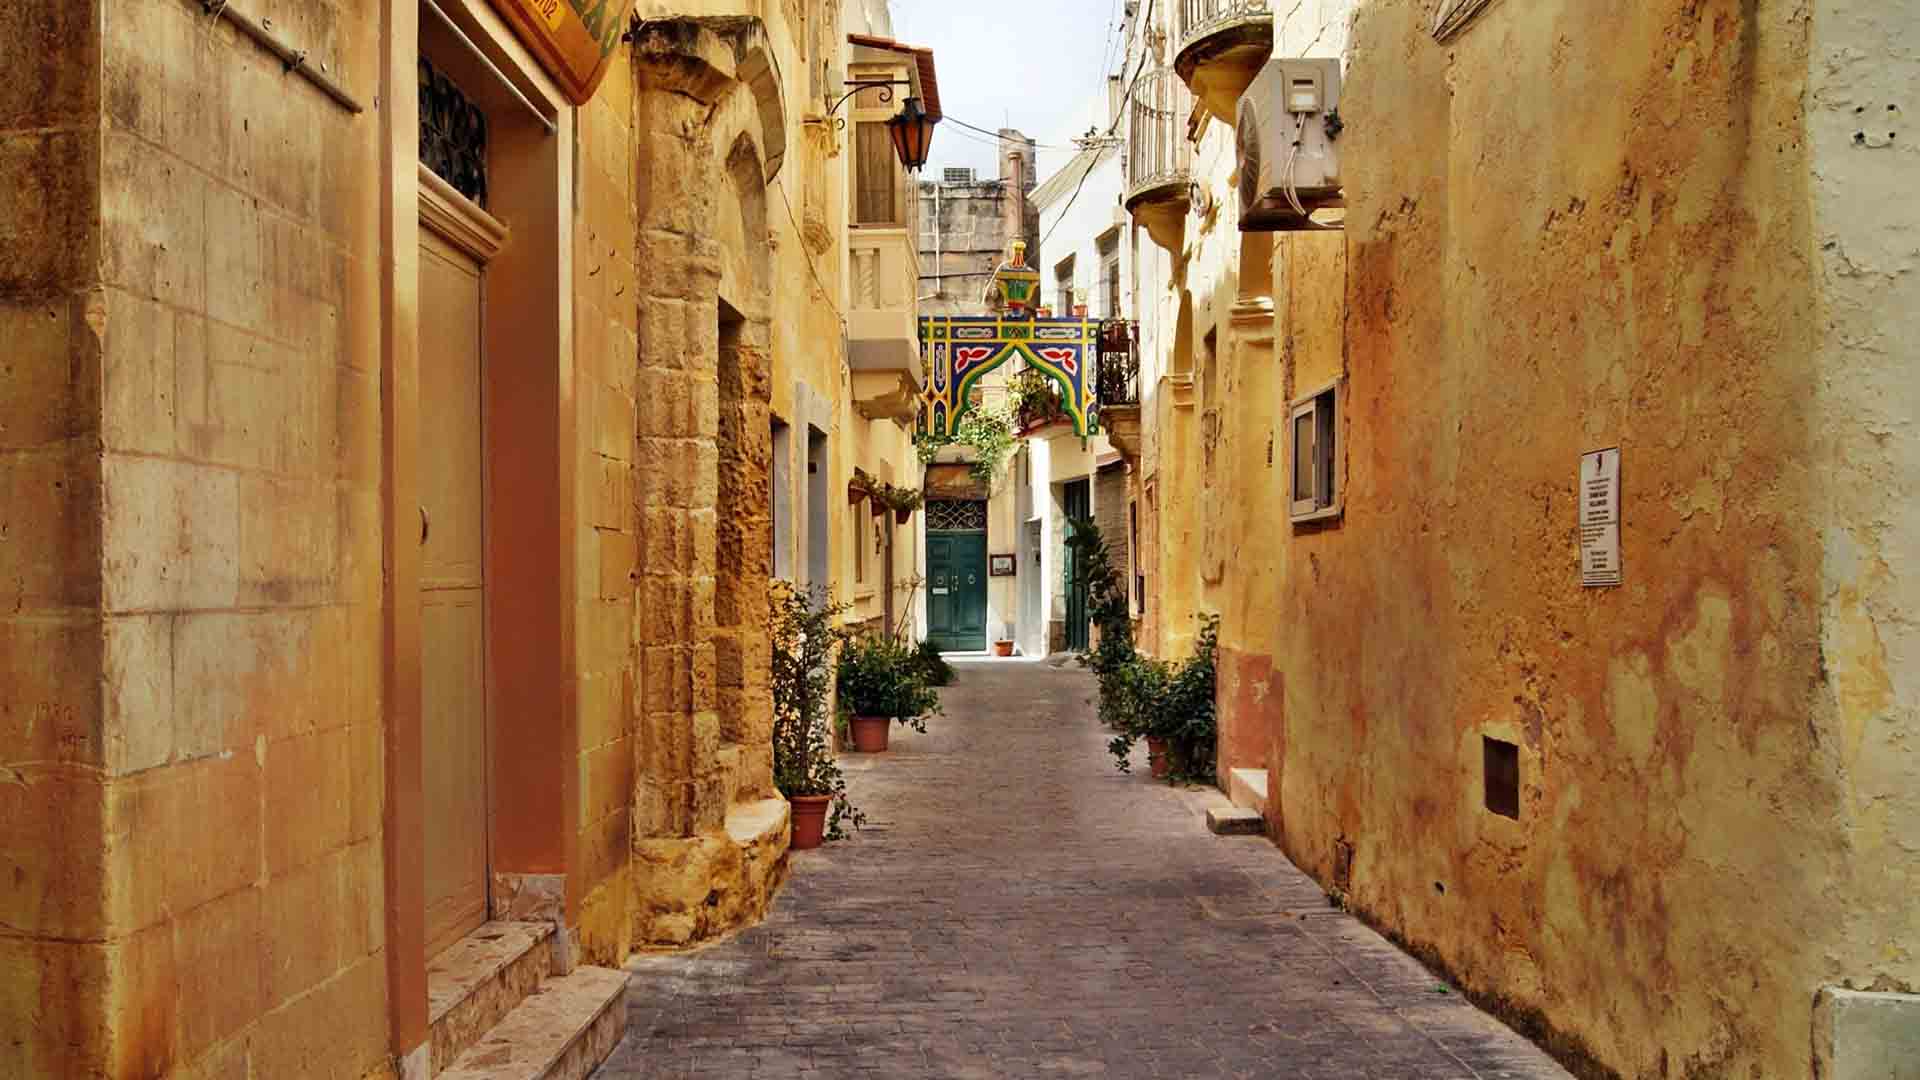 Looking for a romantic getaway? Malta romantic vacations is often overlooked but an ideal spot with lots to offer